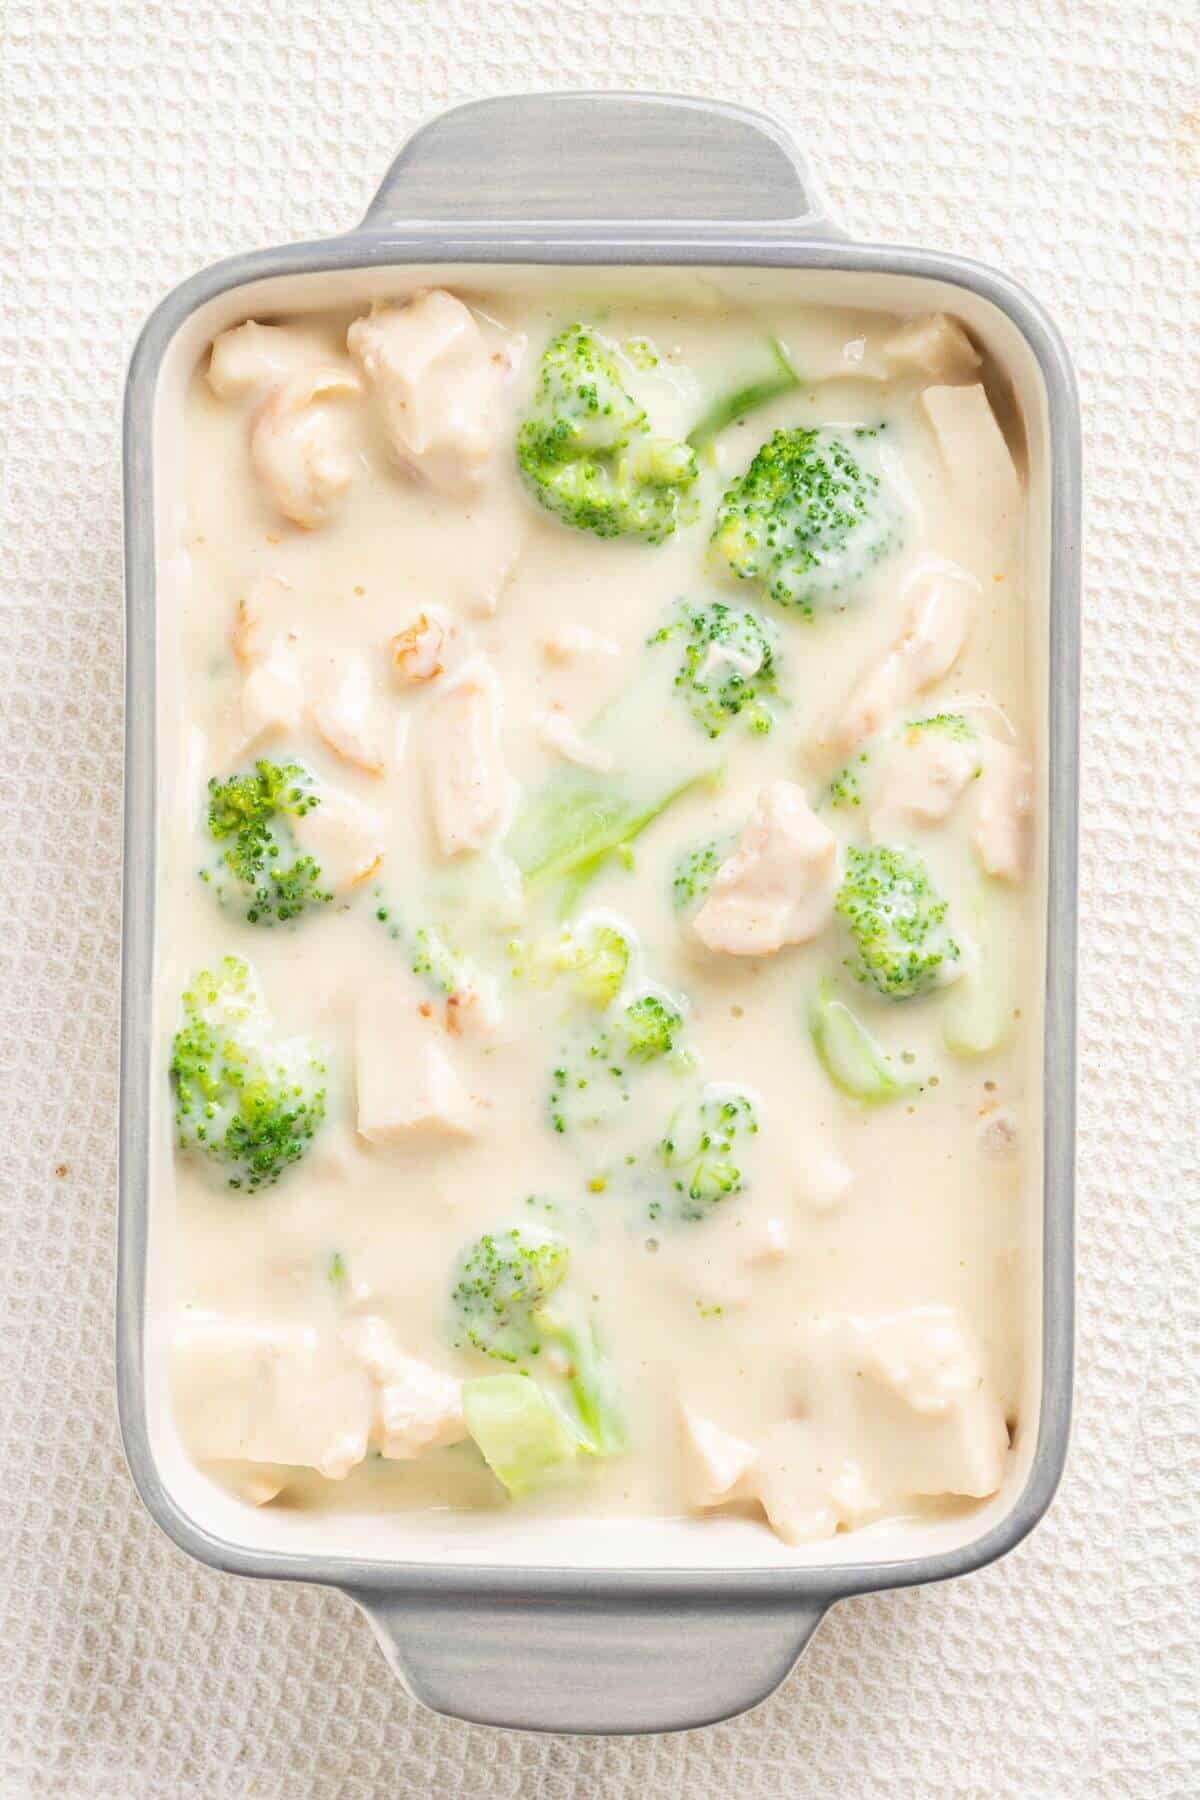 Chicken and broccoli mixture in casserole pan.